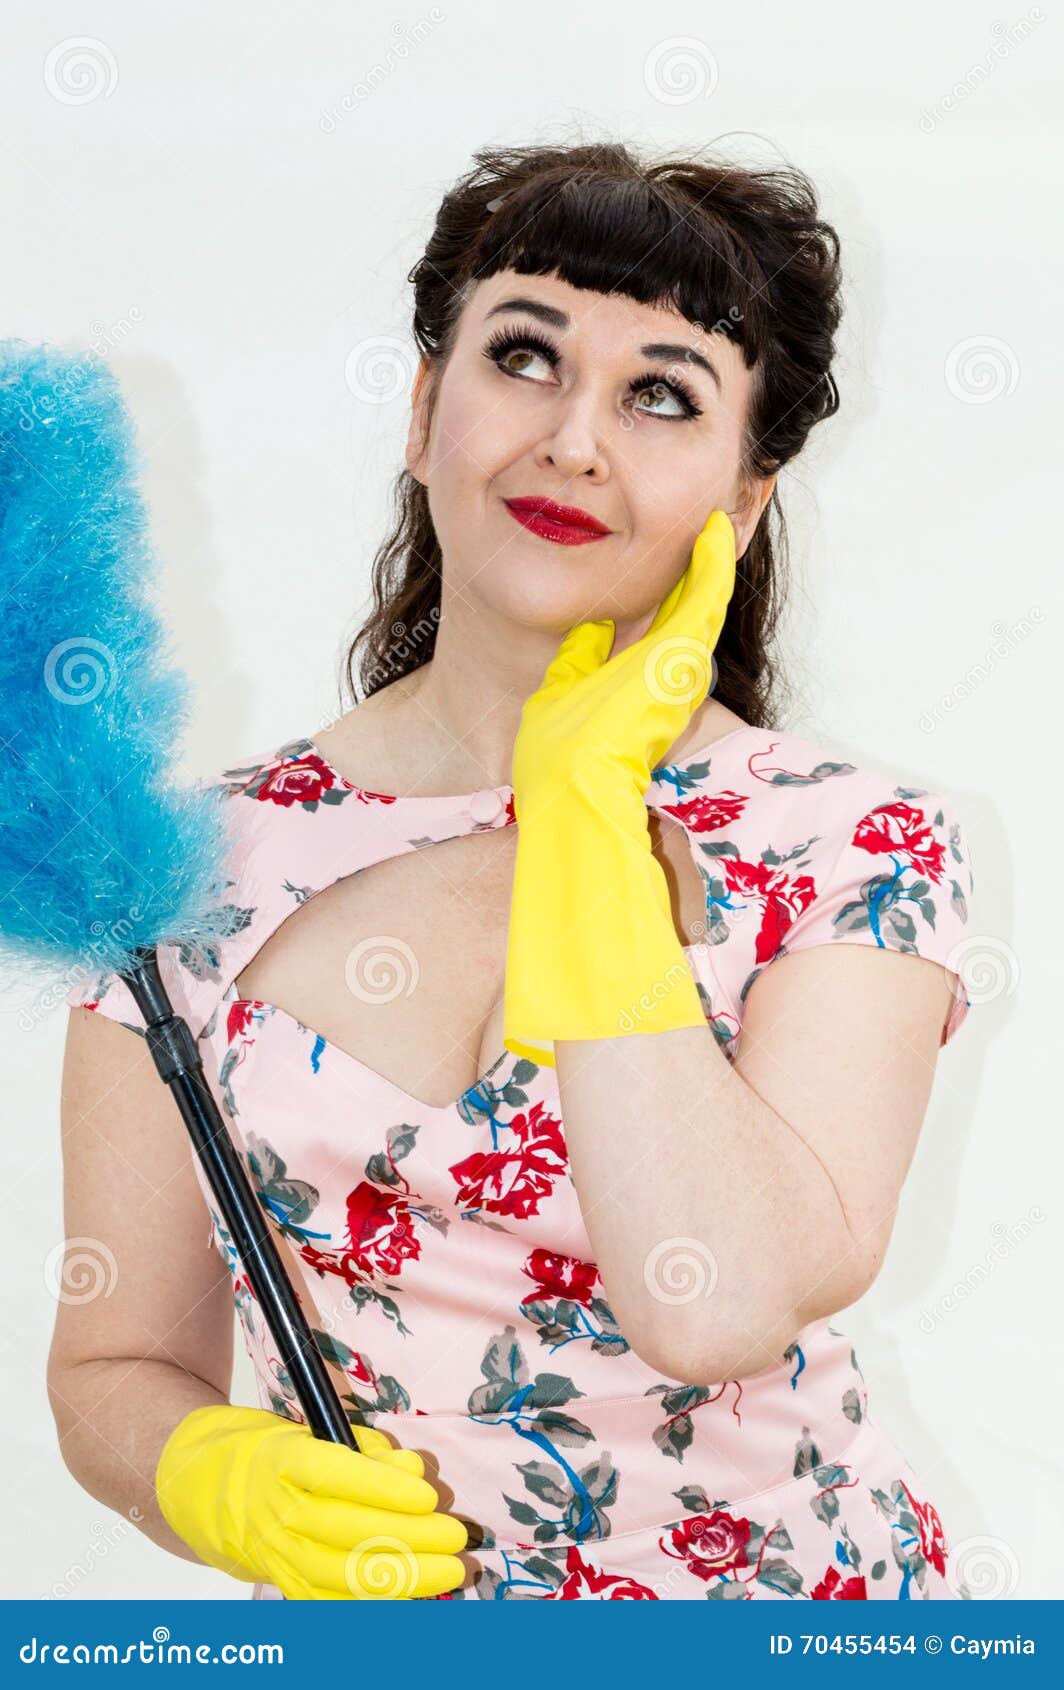 1950s Retro Style Woman with Duster and Rubber Gloves. Stock Photo ...